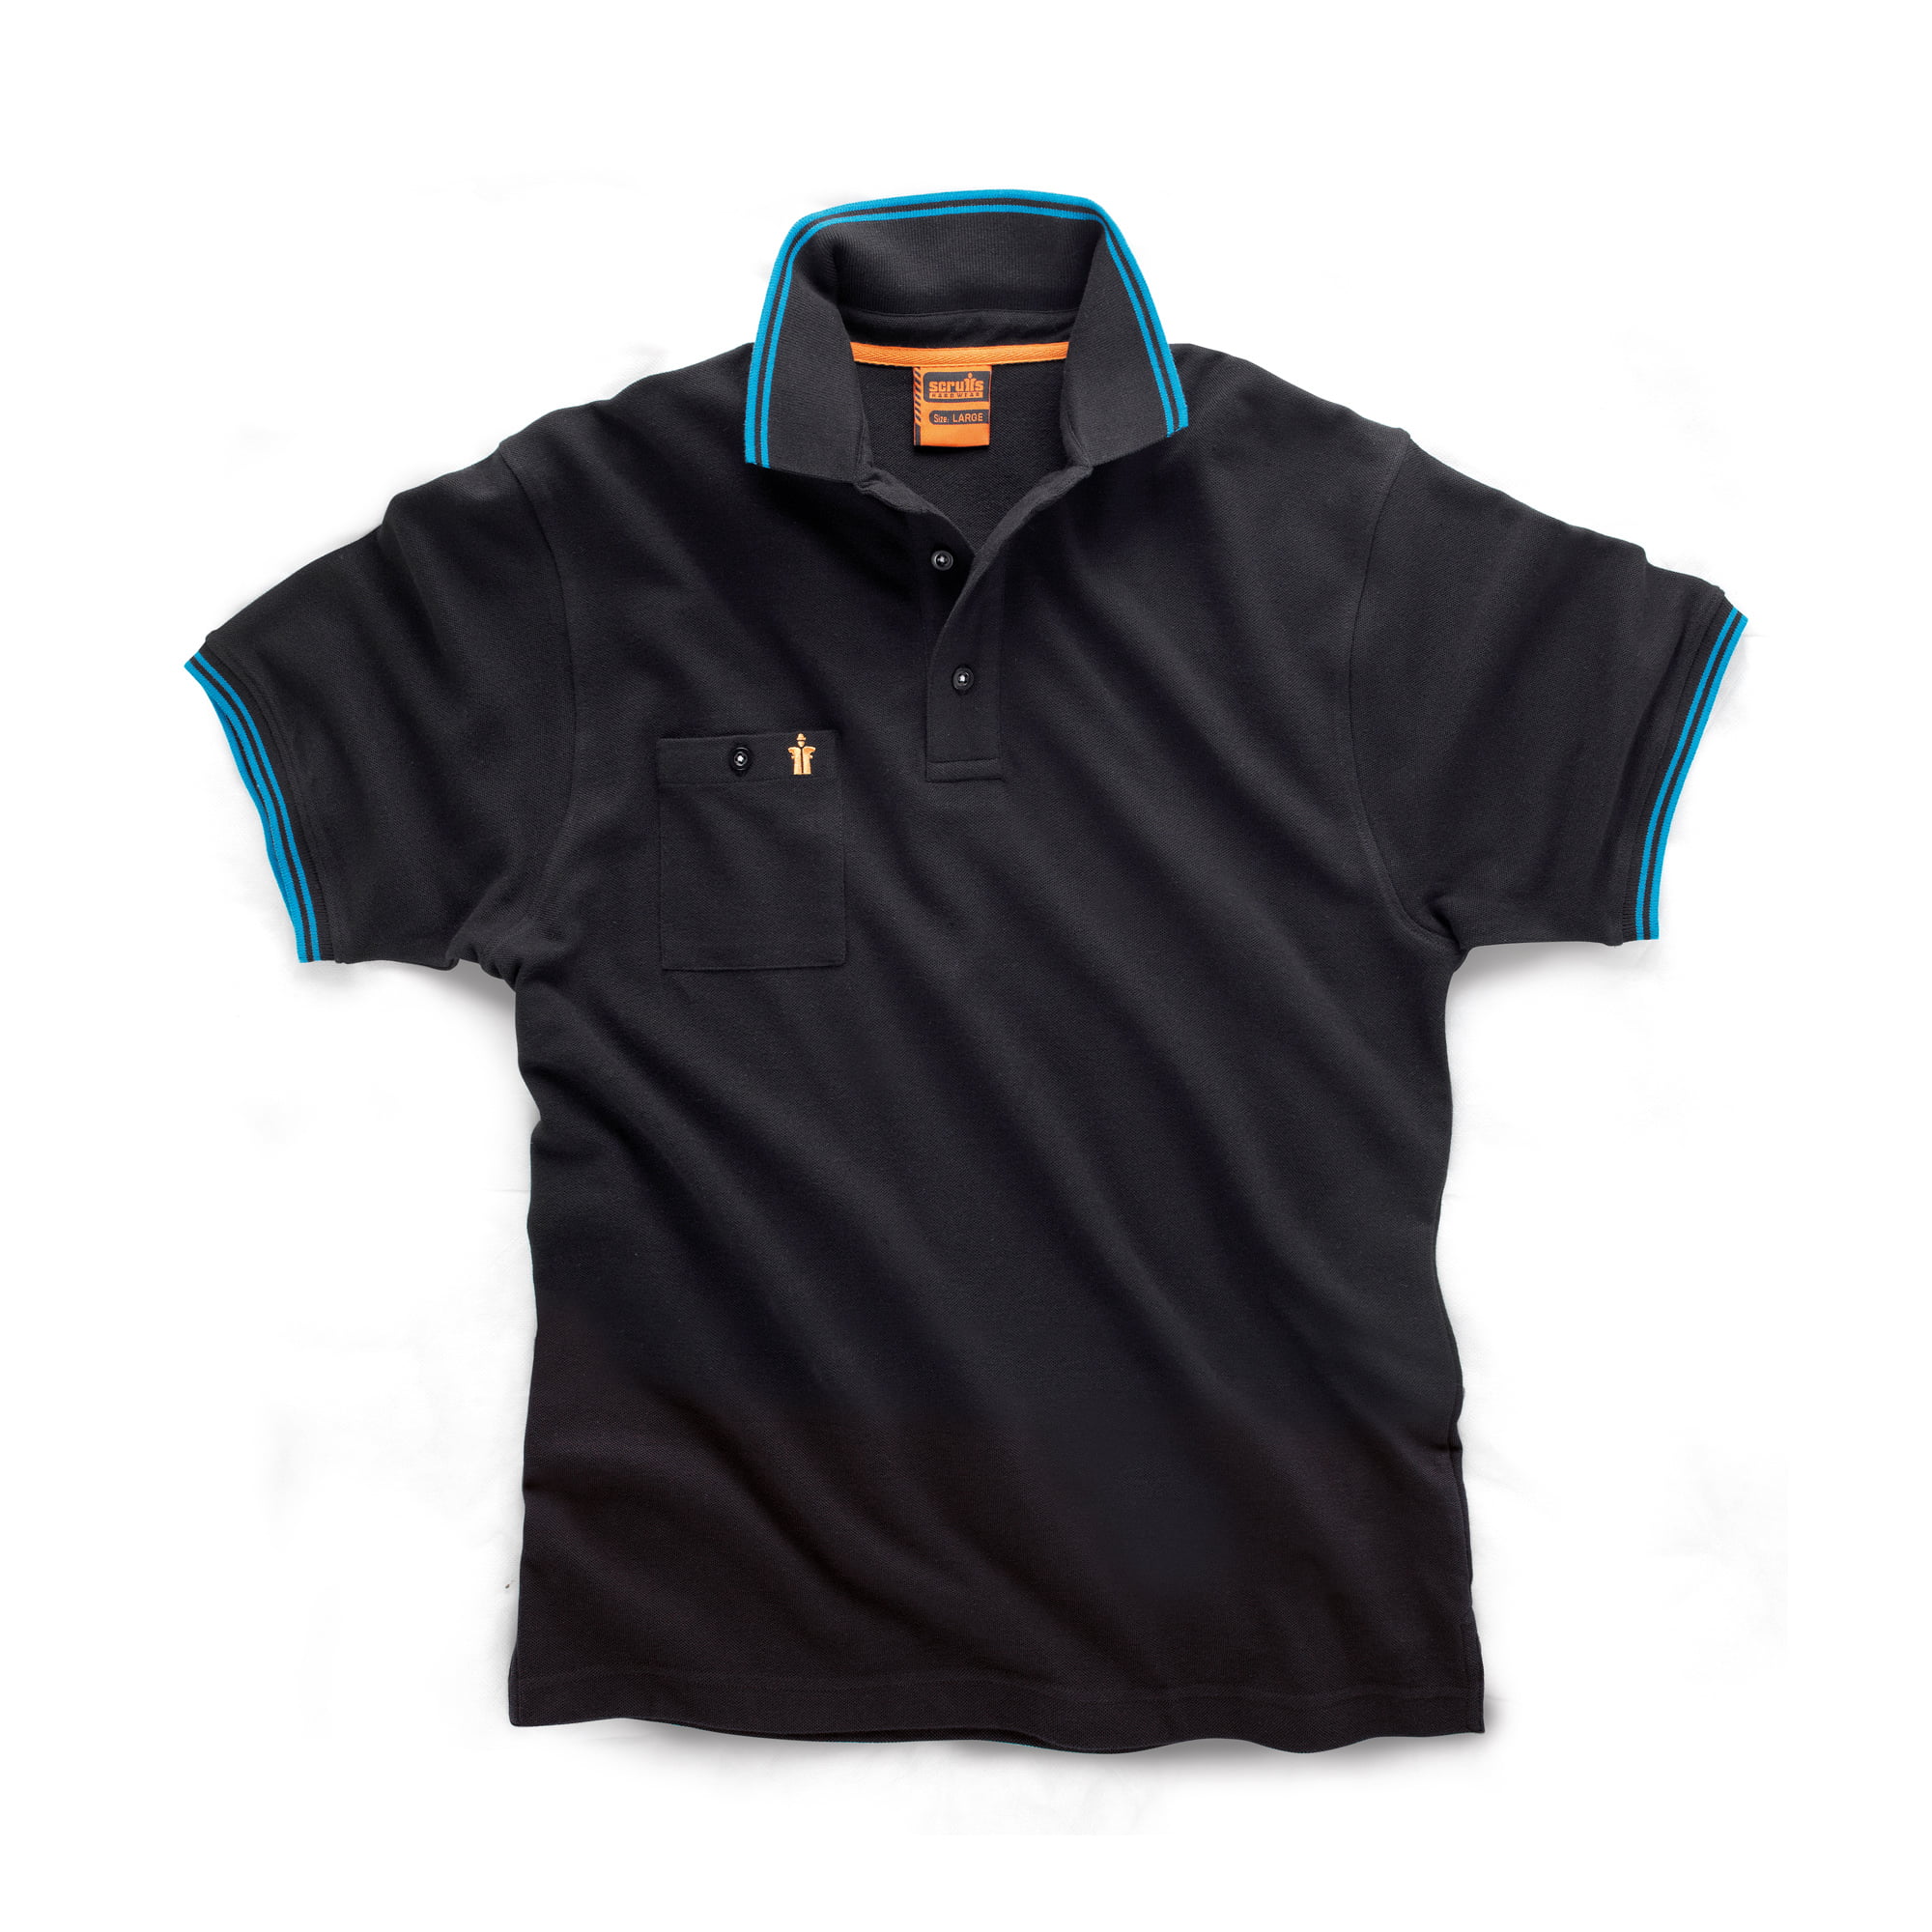 Scruffs black polo with blue rim on collar and sleeves